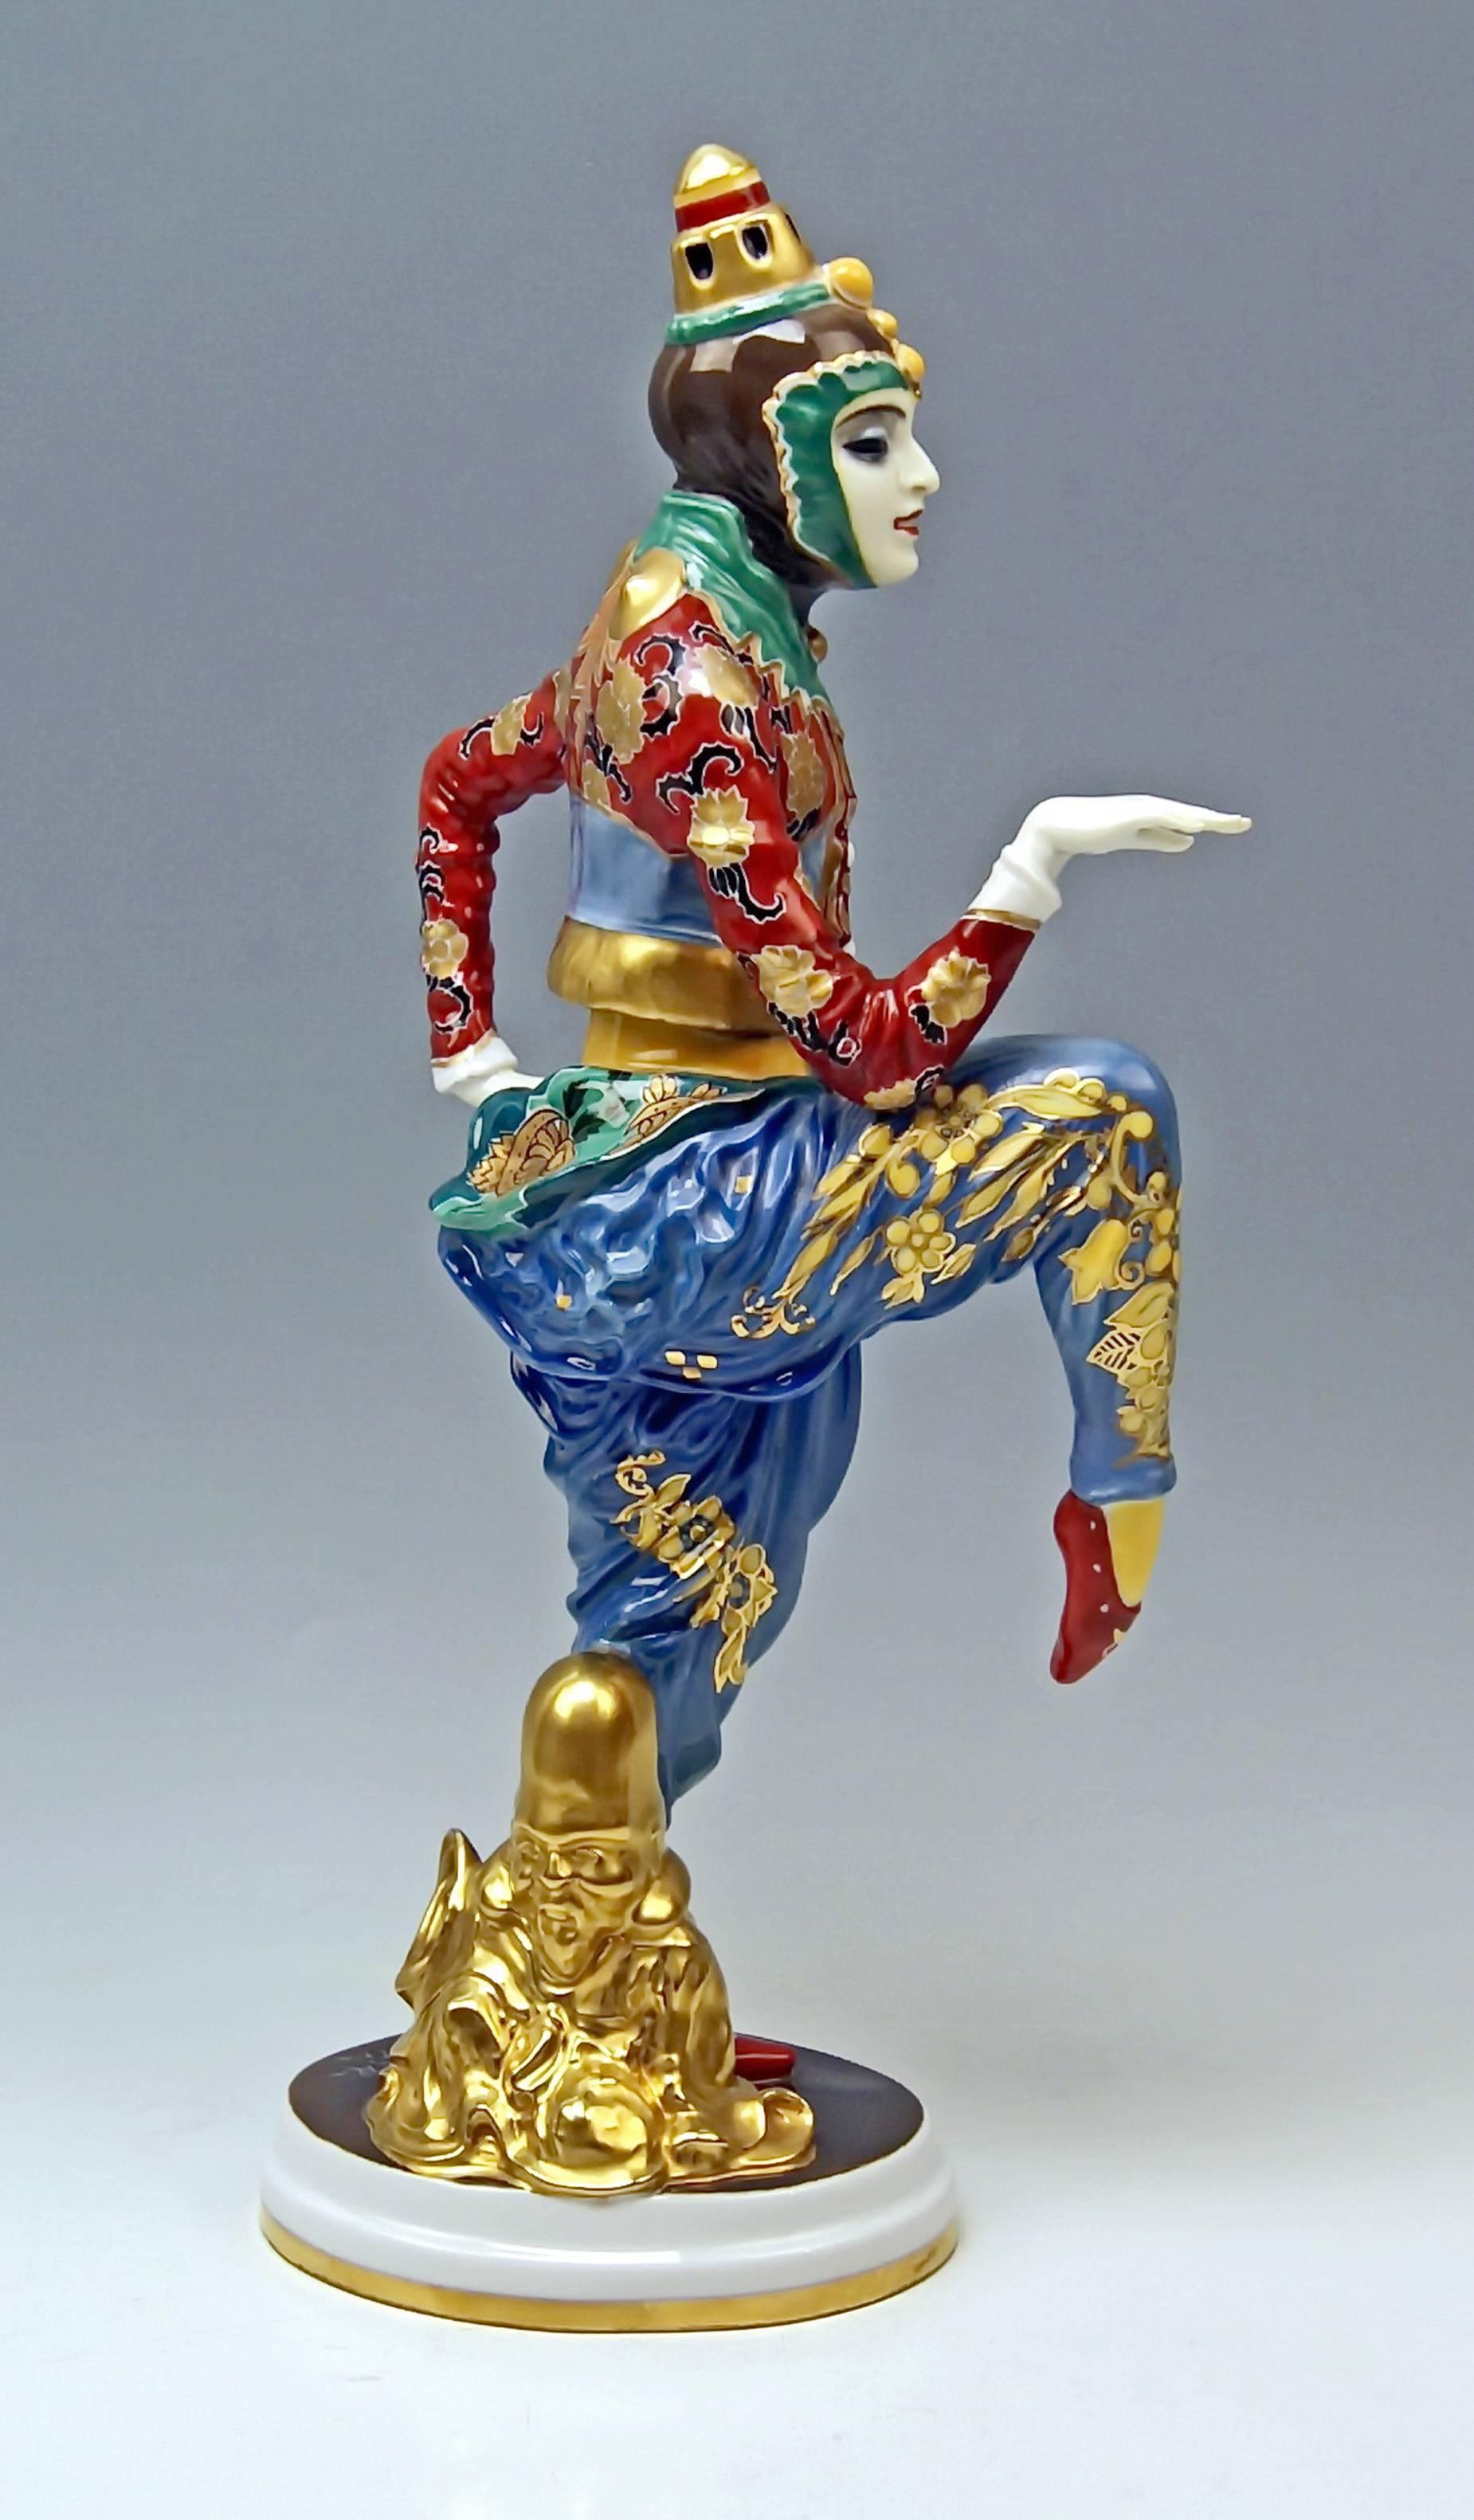 Rosenthal rarest figurine of a Korean dancer:
A gorgeous rare lady dancer called 'Korean dancer' wearing so-said harem pants as well as a jacket looking like a Spencer balances on her left leg while right leg - being sprawled out - is bent / her